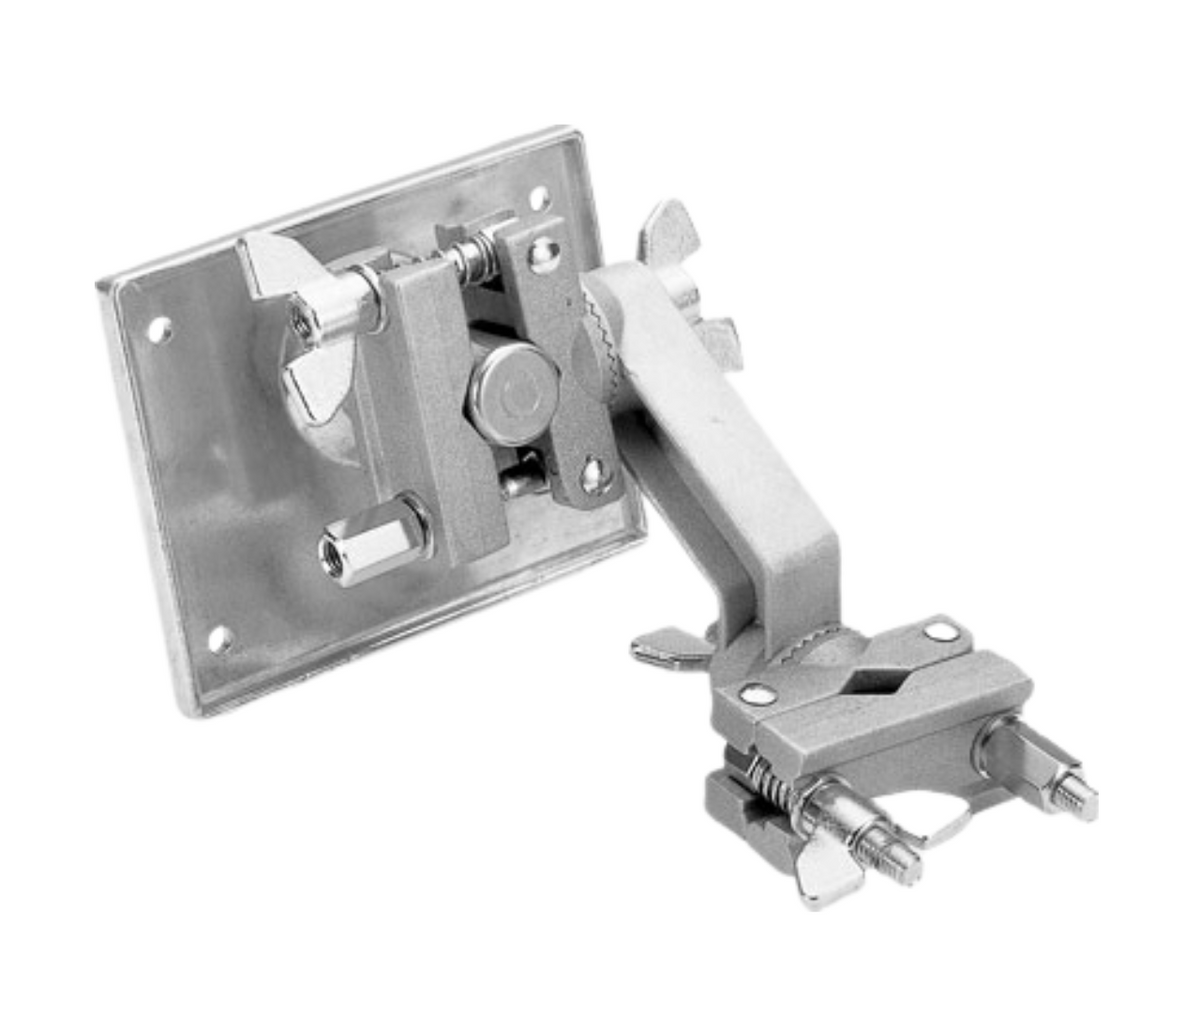 Roland APC-33 Drum Mounting Clamp 4x5 inch All-purpose Metal Clamp for Eletronic Percussion to Acoustic Kit